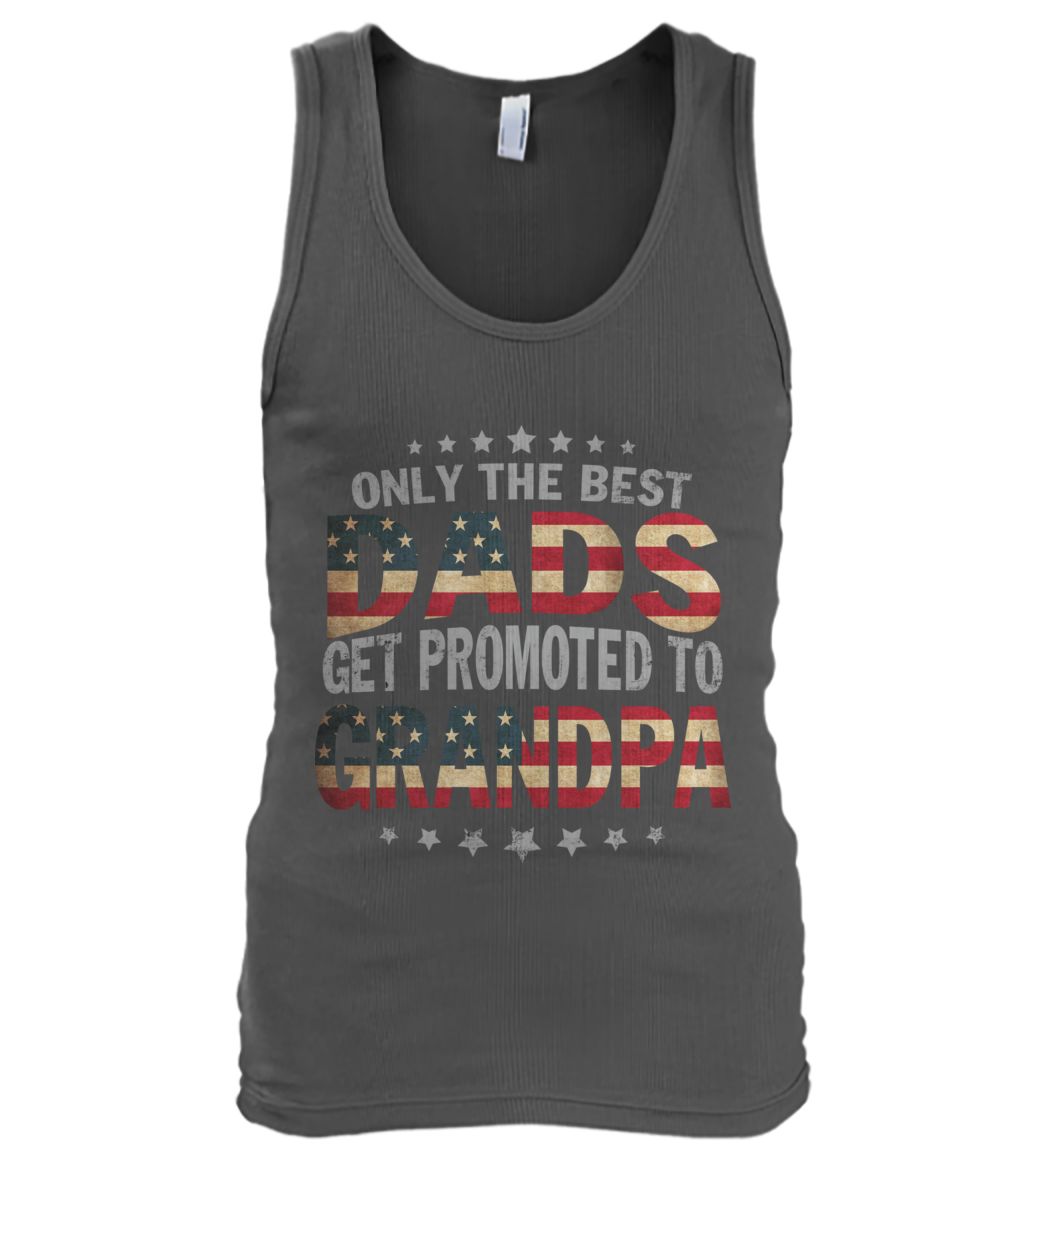 4th of july only the best dads get promoted to grandpa men's tank top